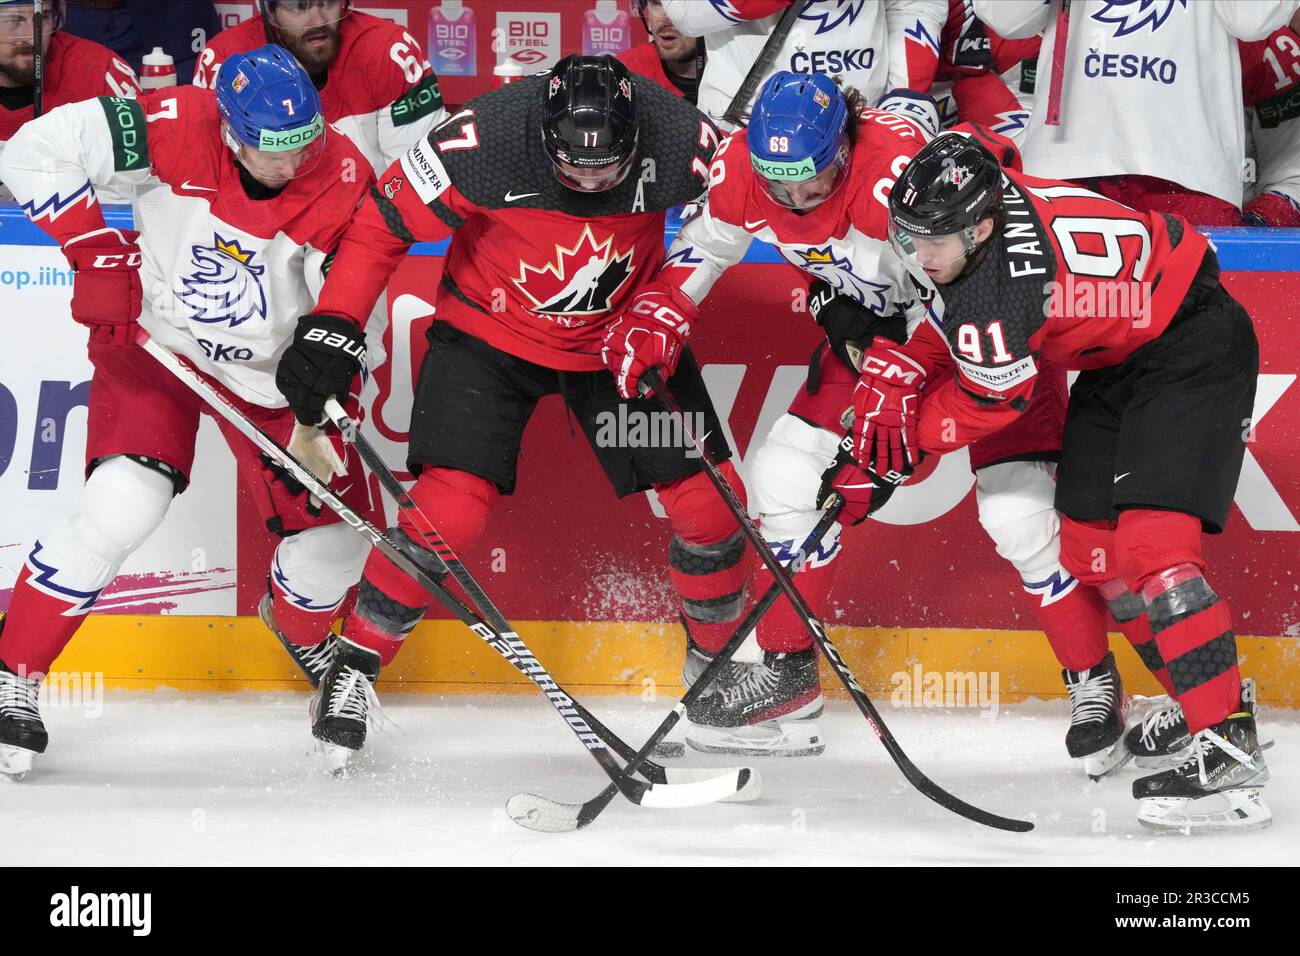 Adam Fantilli of Team Canada skates the puck during the first